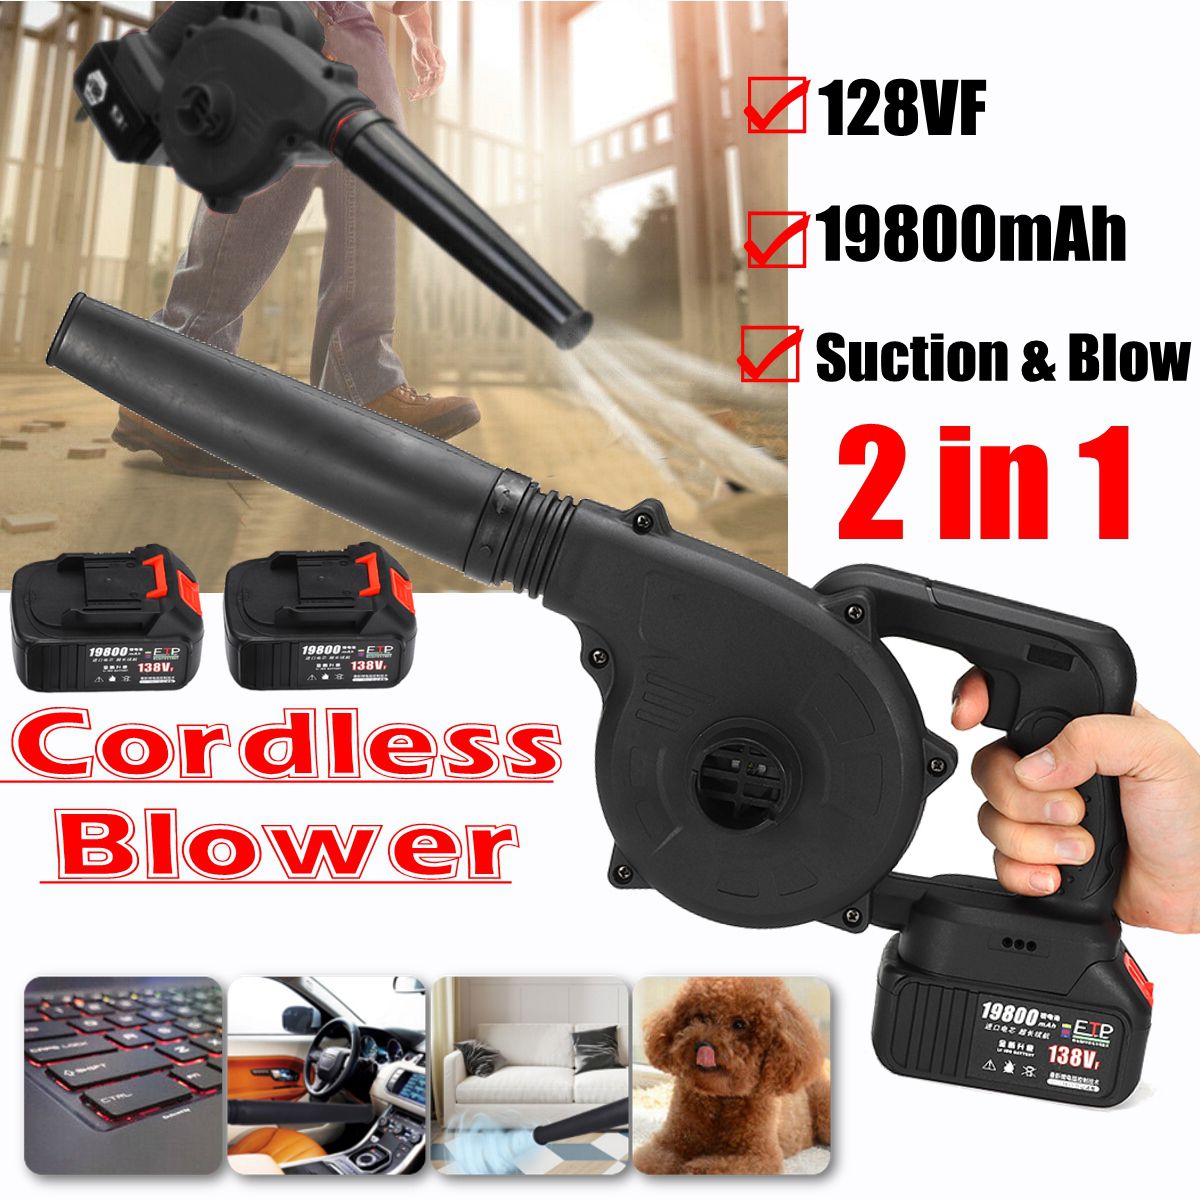 220V-128VF-19800mAh-Cordless-Electric-Air-Blower-Blowing-and-Sucking-Dual-useDust-Computer-cleaner-E-1579909